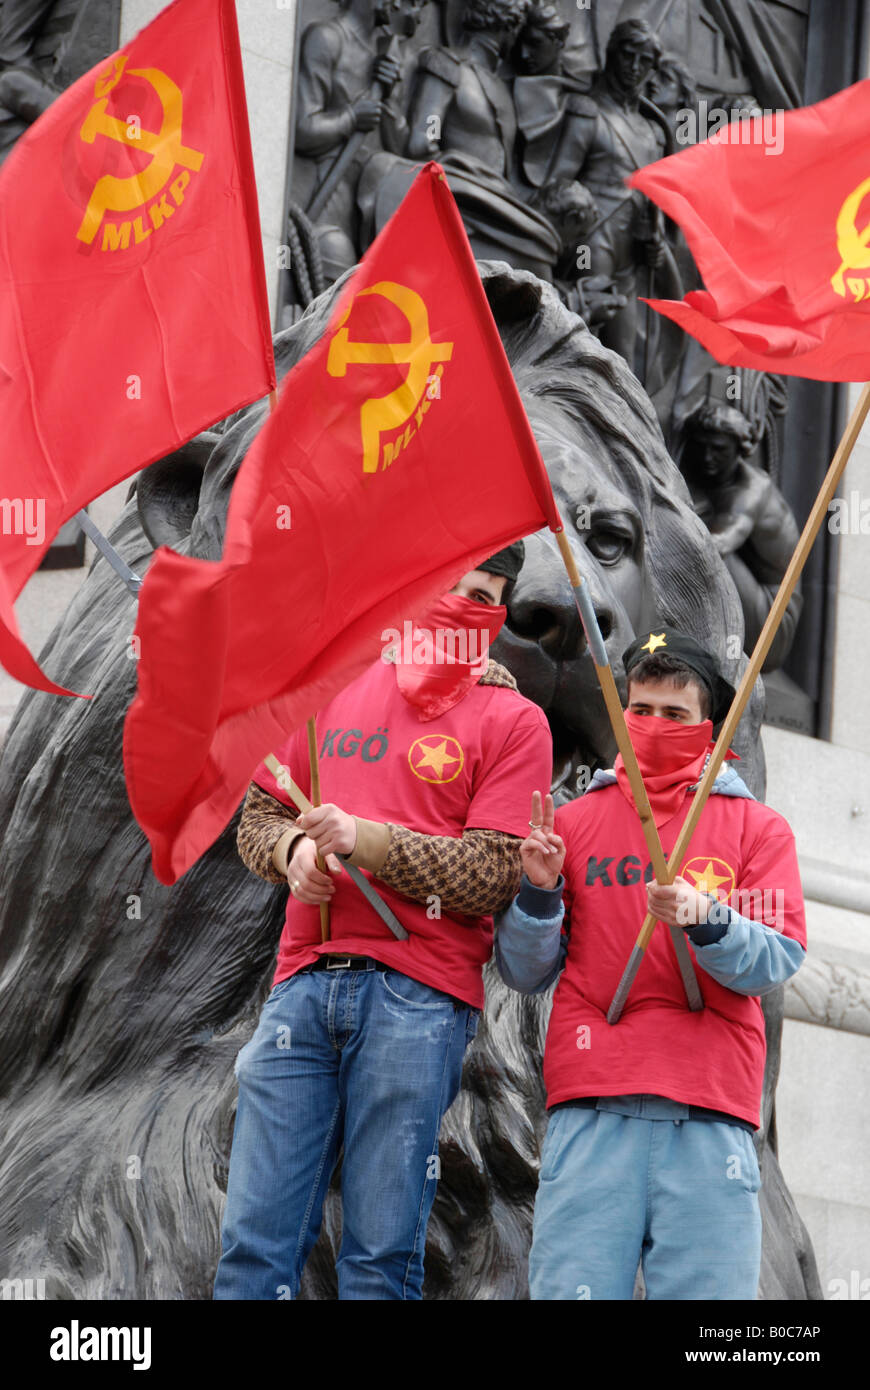 Two MLKP Turkish Marxist Leninist Communist Party members with red flags standing under lions in Trafalgar Square. Stock Photo